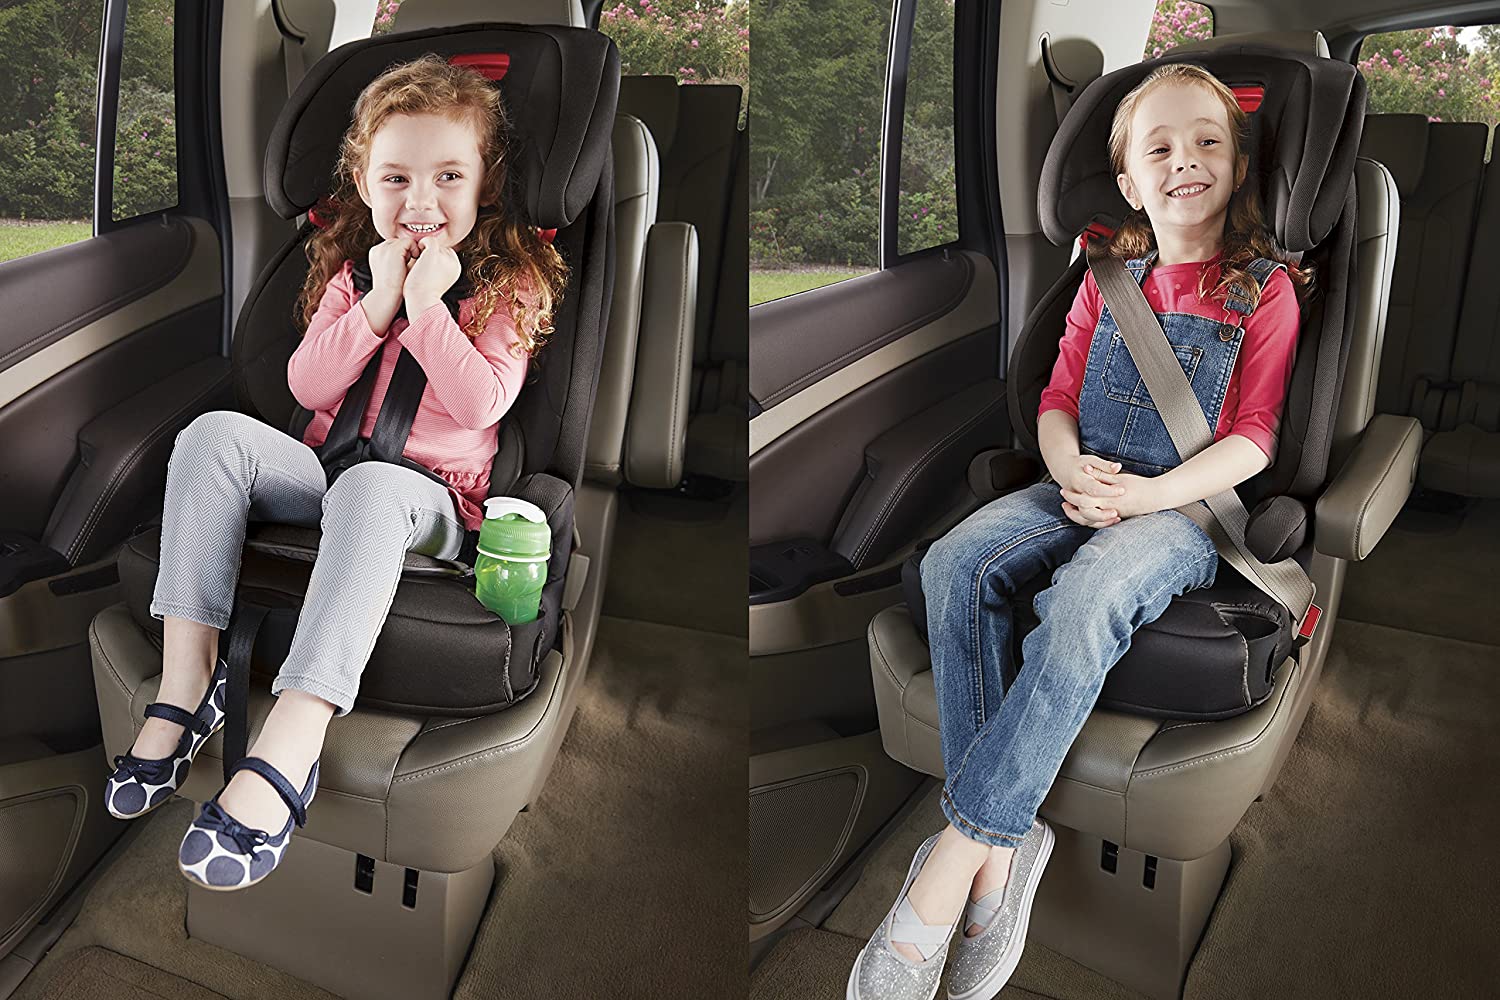 Best Narrow Car Seats For Small Cars, Best Booster Car Seat For Small Cars